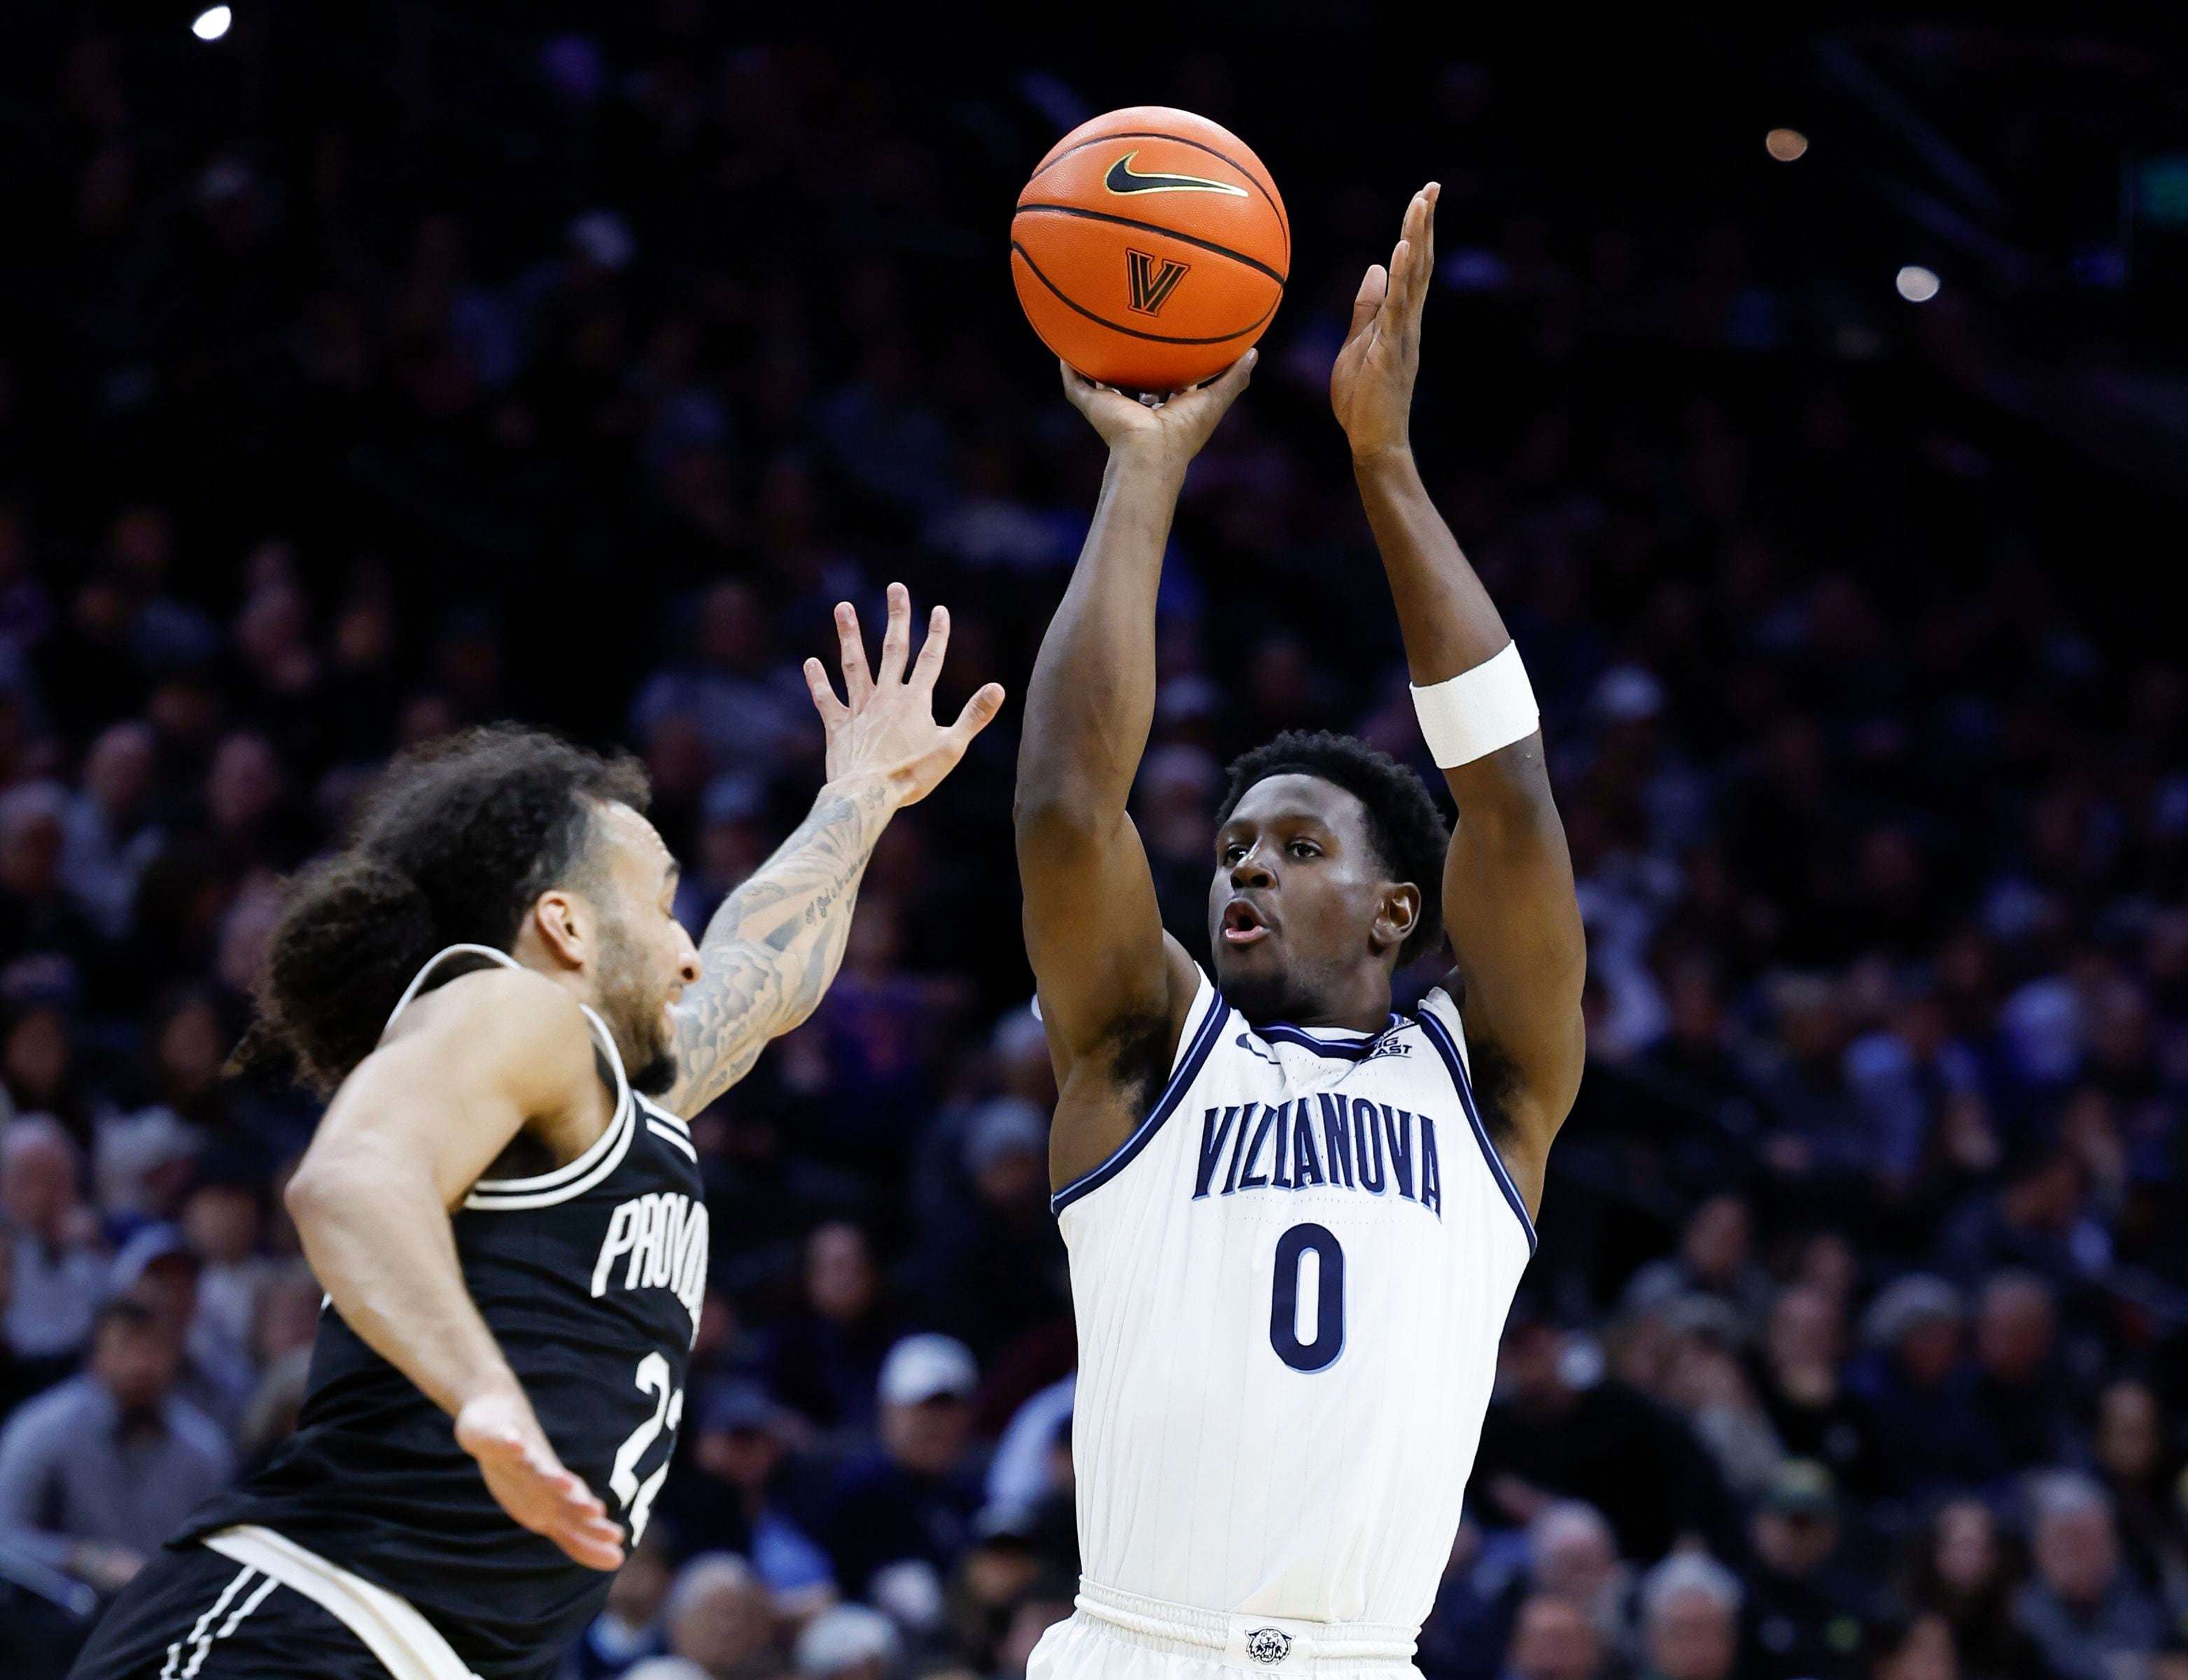 in a must-win spot, villanova rolled past providence and might have saved its season